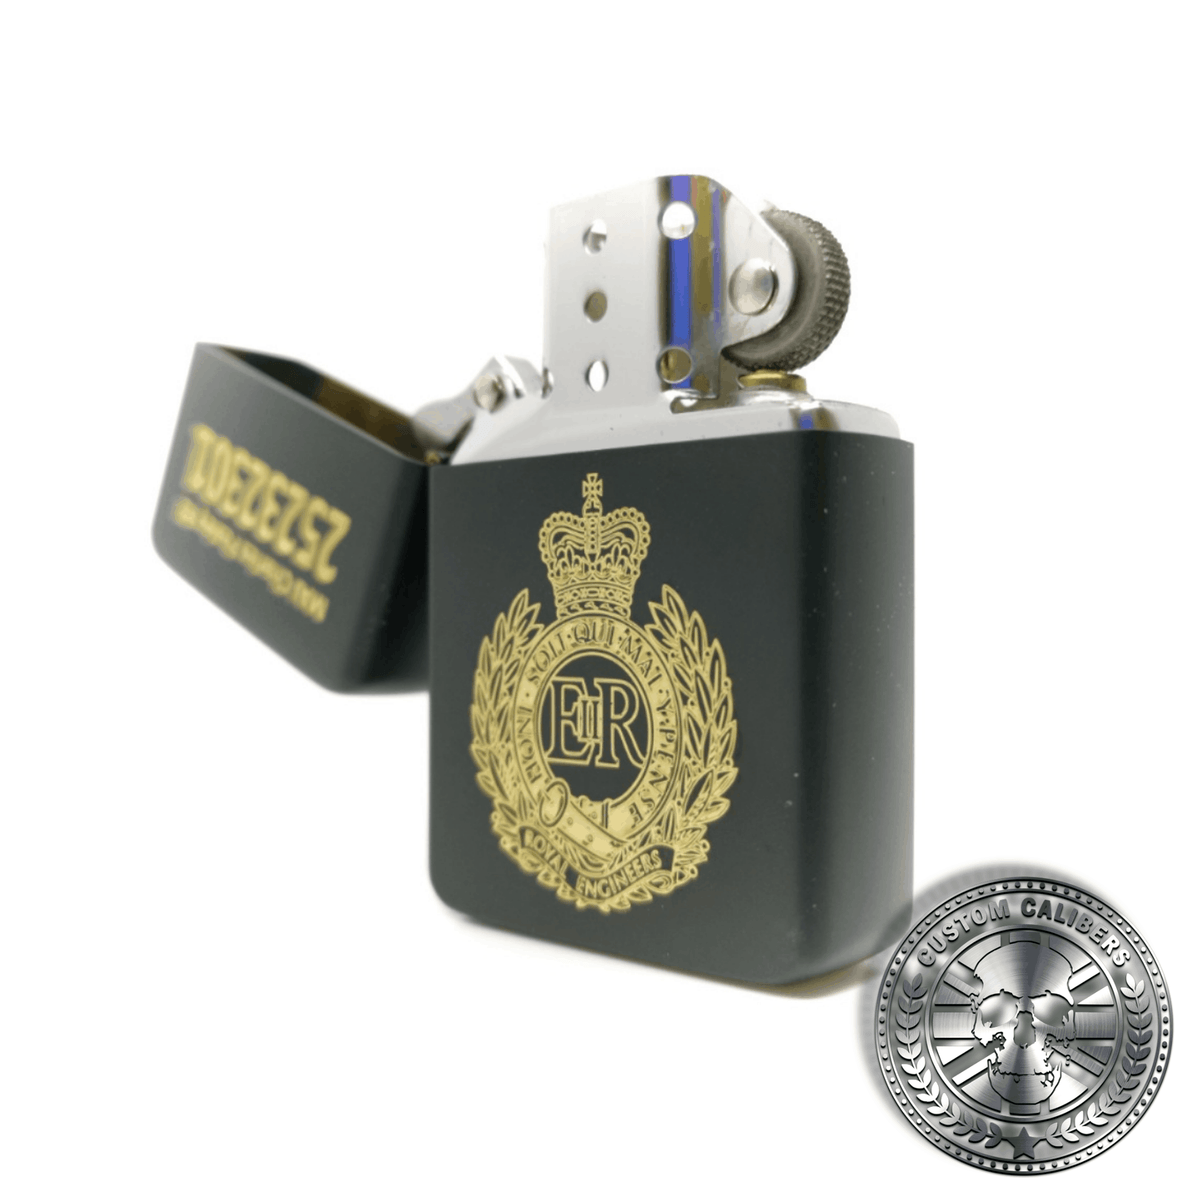 A close up shot of a matt black solid brass flip top lighter engraved with the royal engineers crest on the front with a name and military service number on the lid which has been opened to show the inside of the lighter